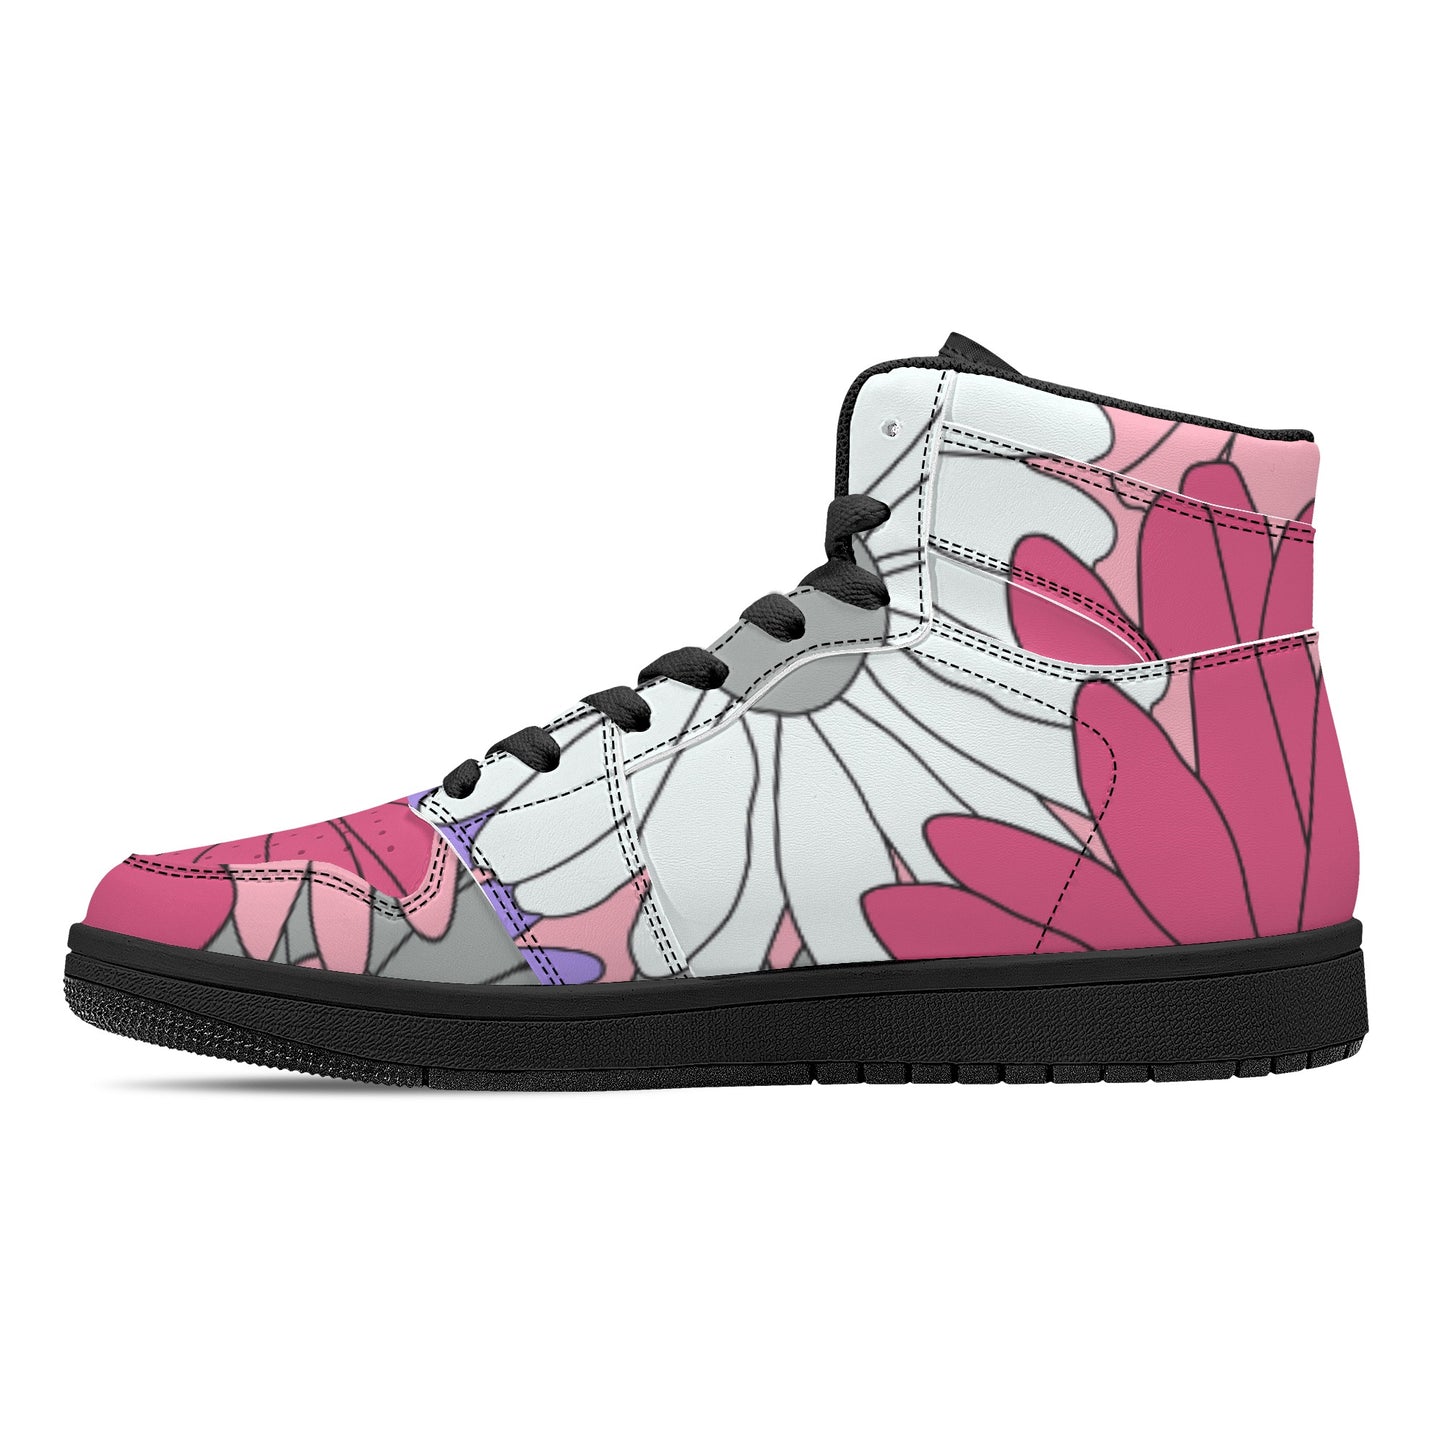 Daisy Flower Women's Black High Top Leather Sneakers